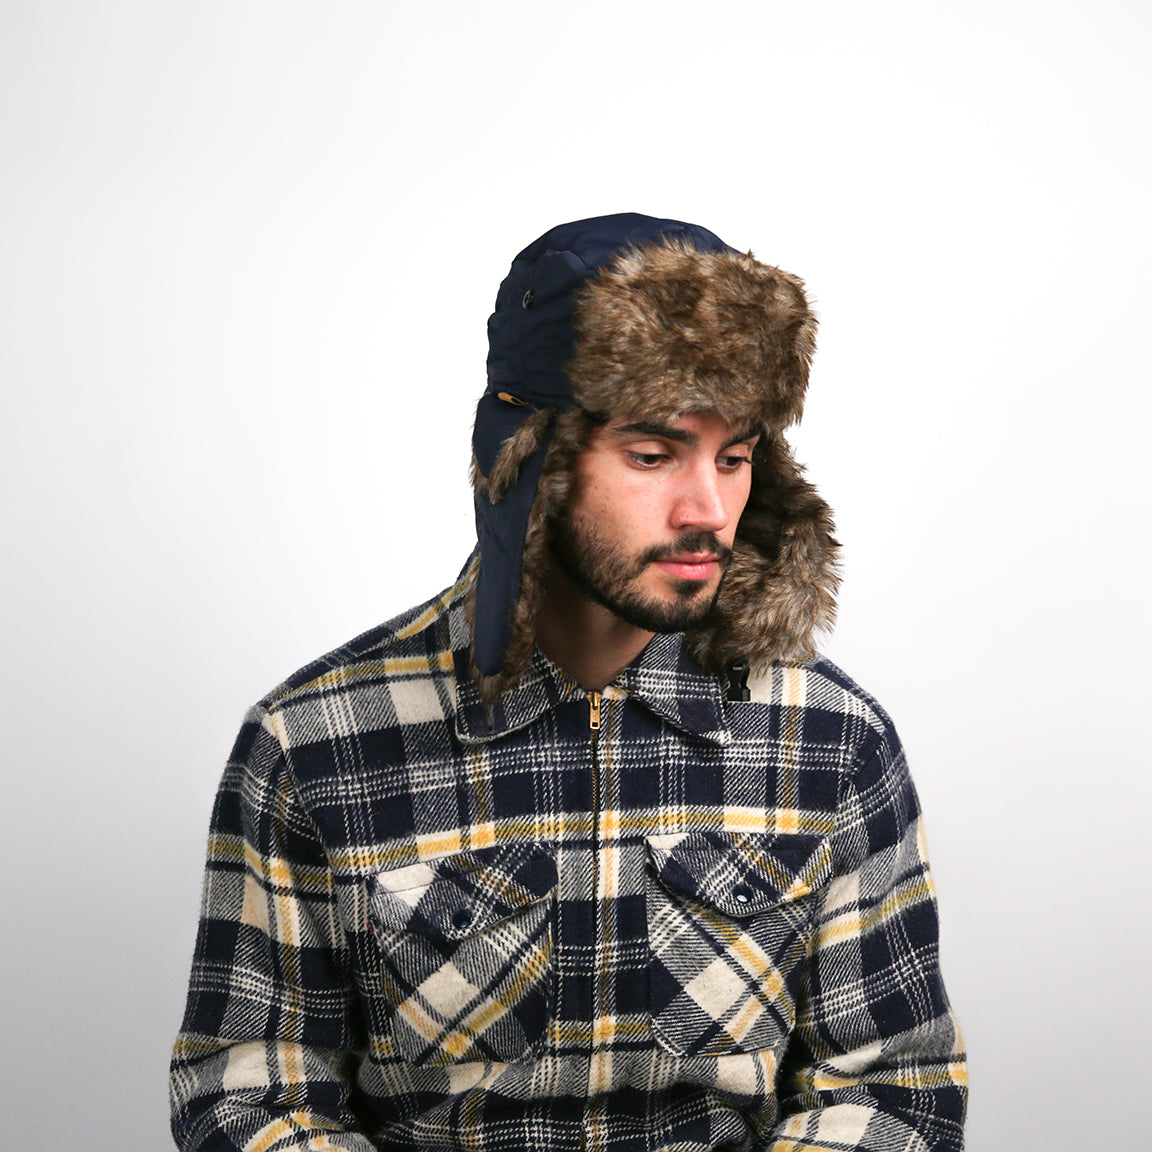 A person is featured wearing a navy blue aviator hat with a brown faux fur lining. The hat includes practical ear flaps and a buttoned chin strap, offering both warmth and style.